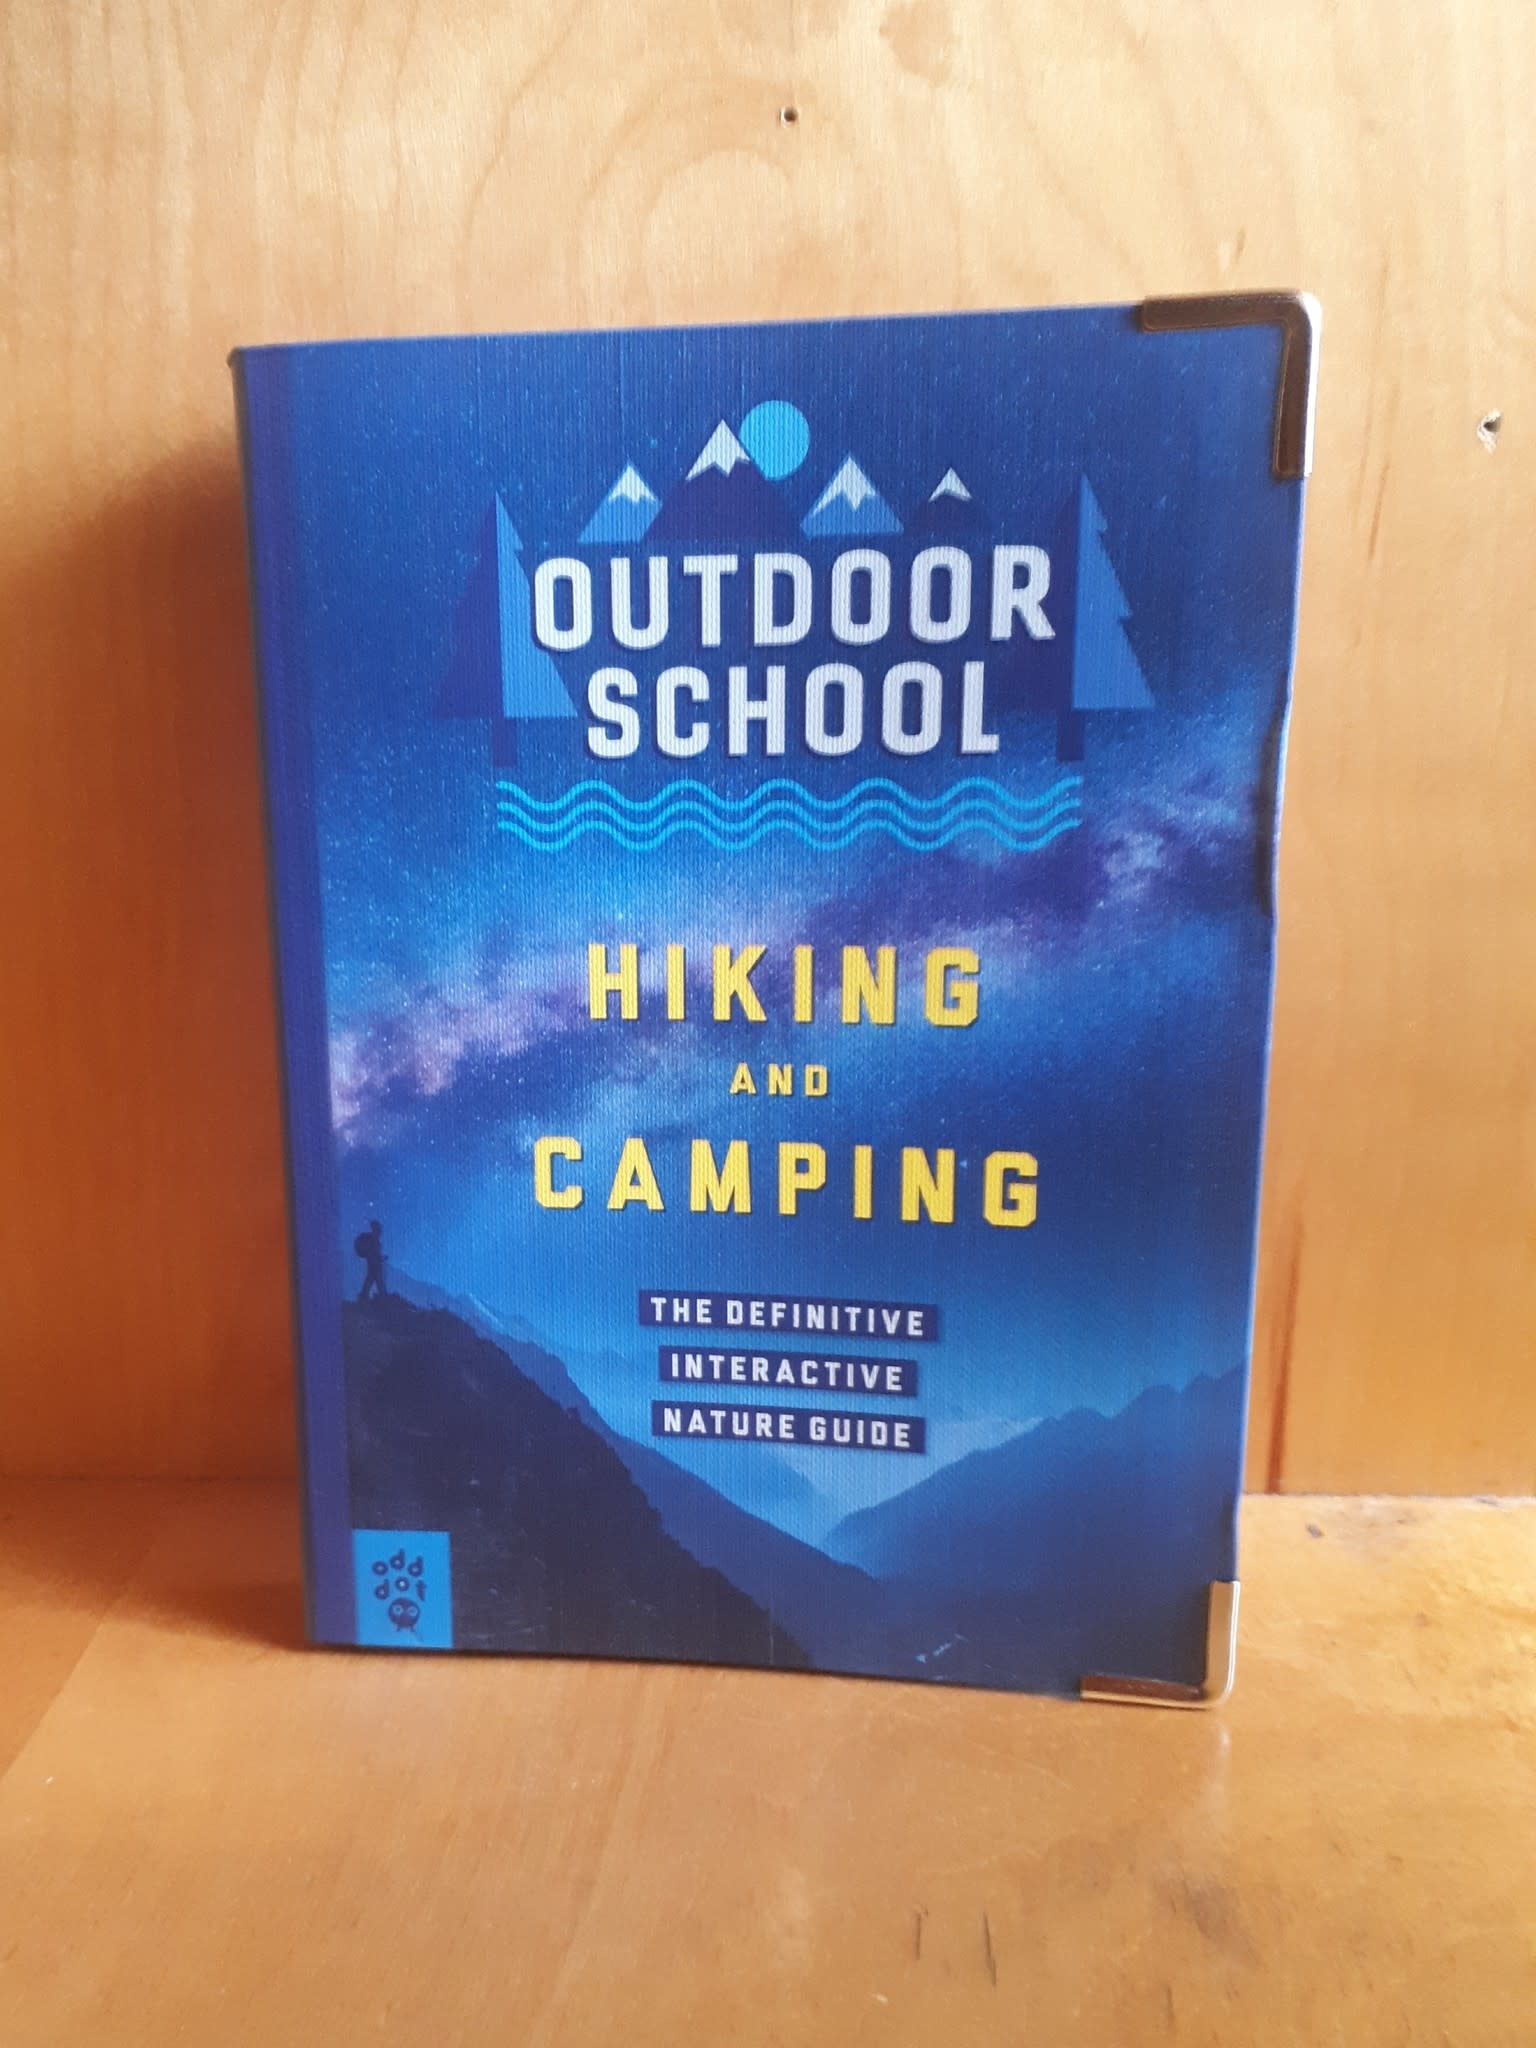 OUTDOOR SCHOOL HIKING AND CAMPING